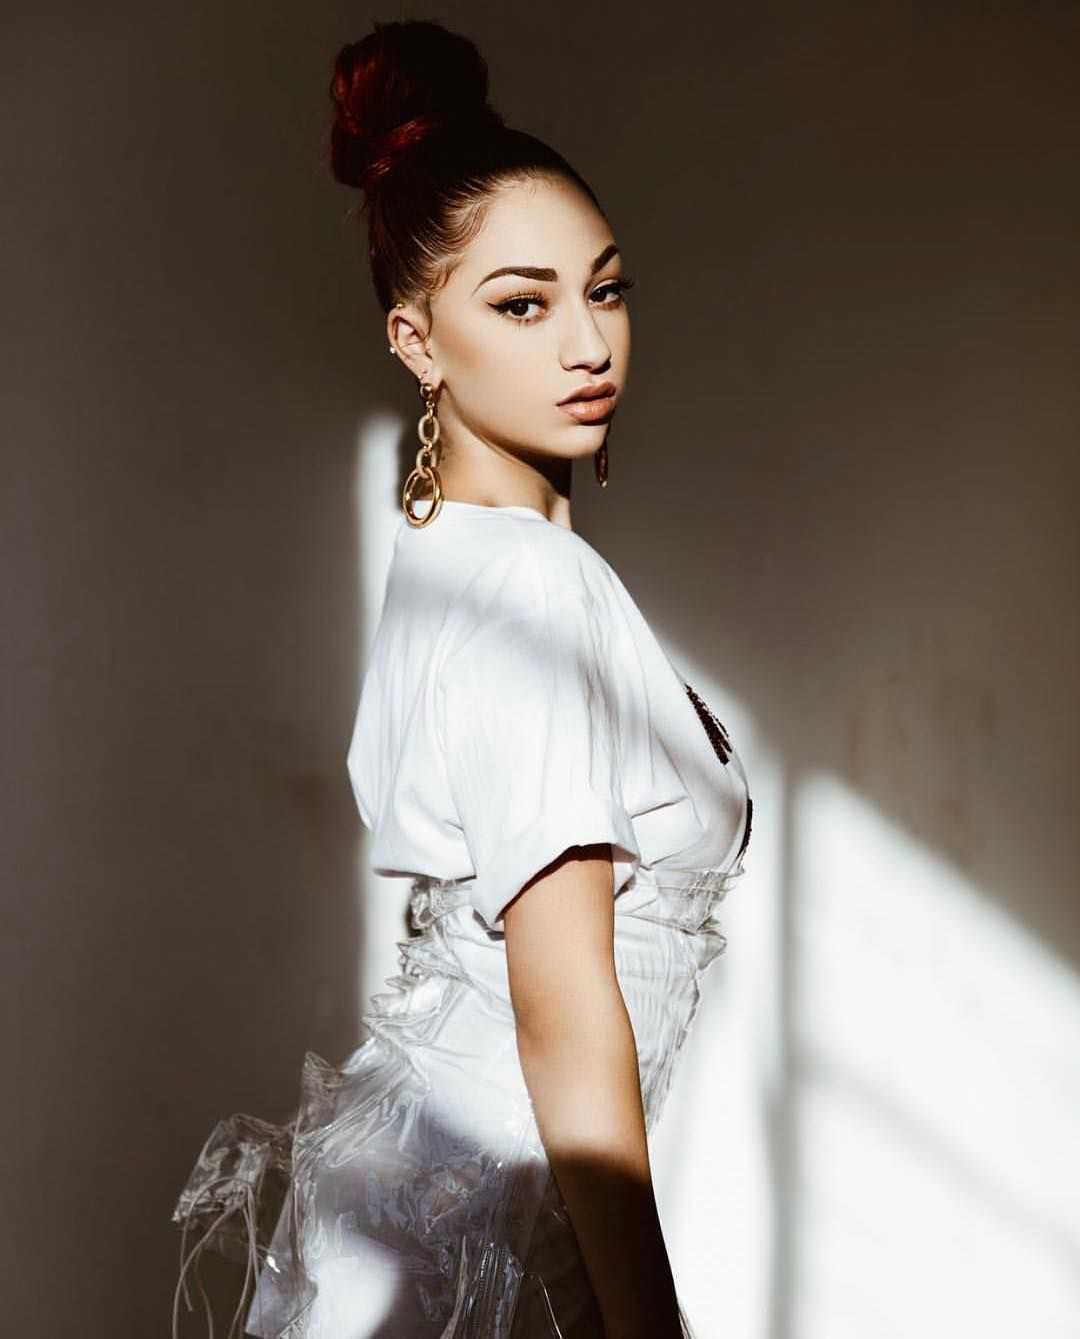 70+ Hot Pictures Of Danielle Bregoli aka Bhad Bhabie Which Will Win Your Heart 44